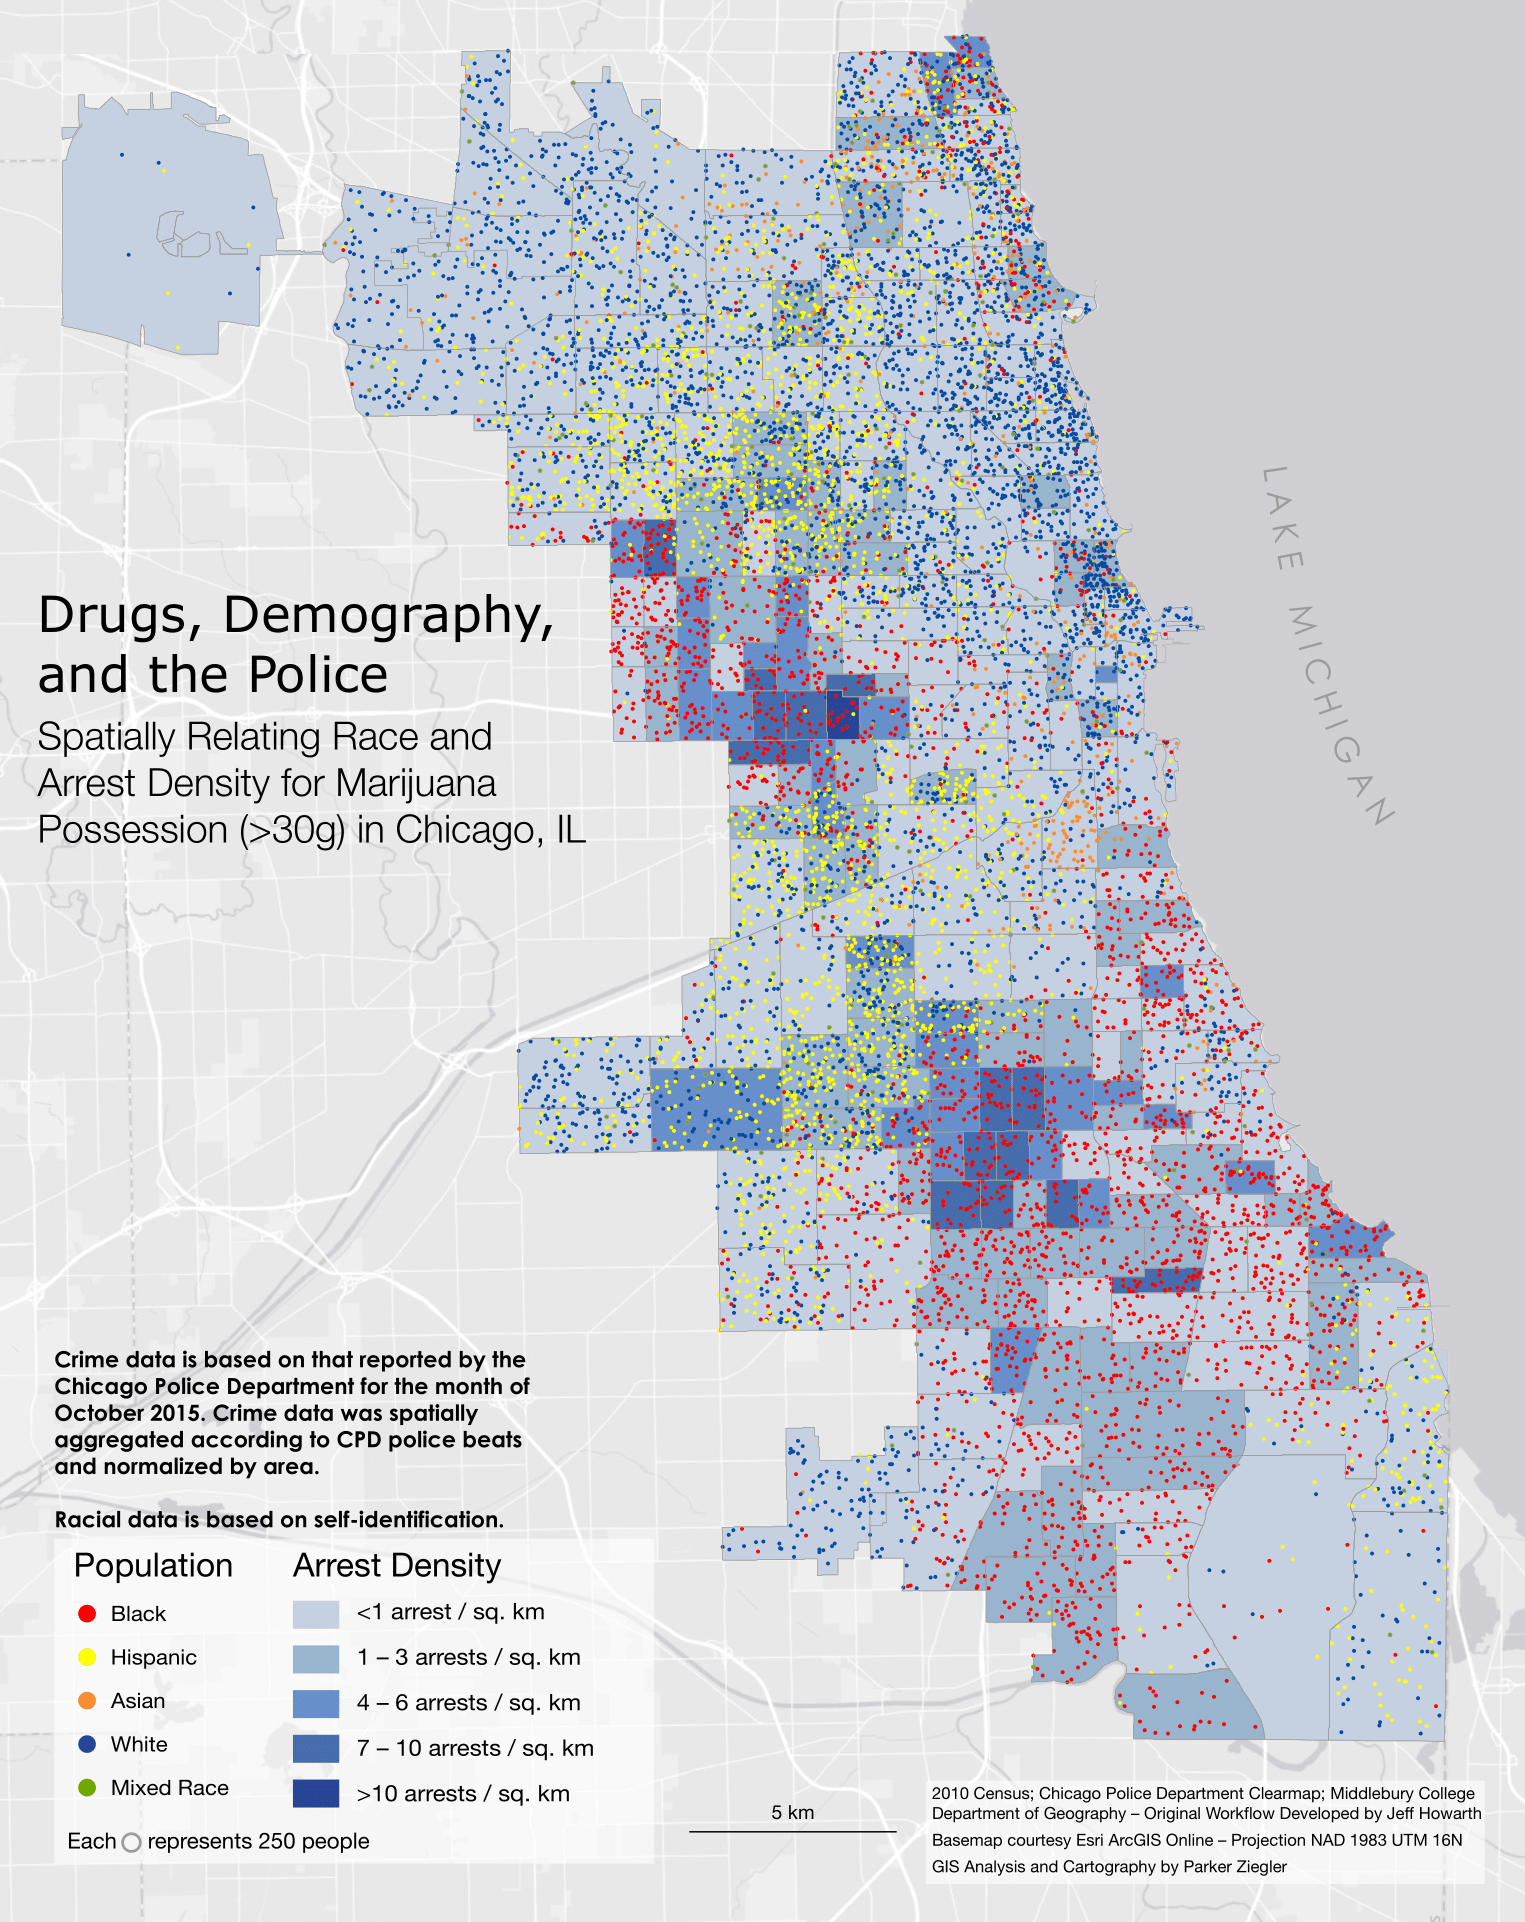 A map spatially correlating race and arrest density for possession of marijuana in Chicago, IL.